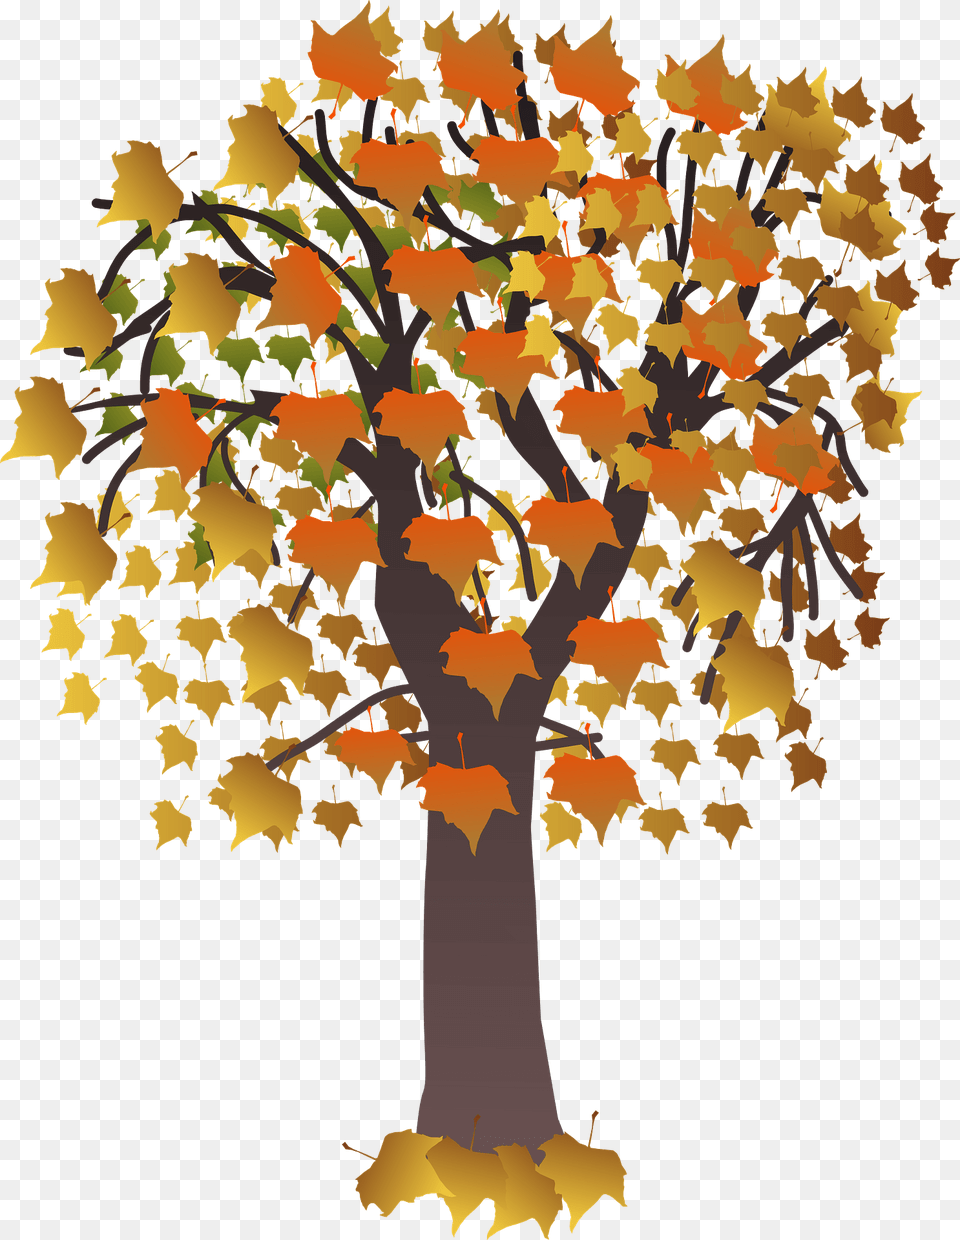 Autumn Maple Tree Clipart, Leaf, Plant, Oak, Sycamore Png Image